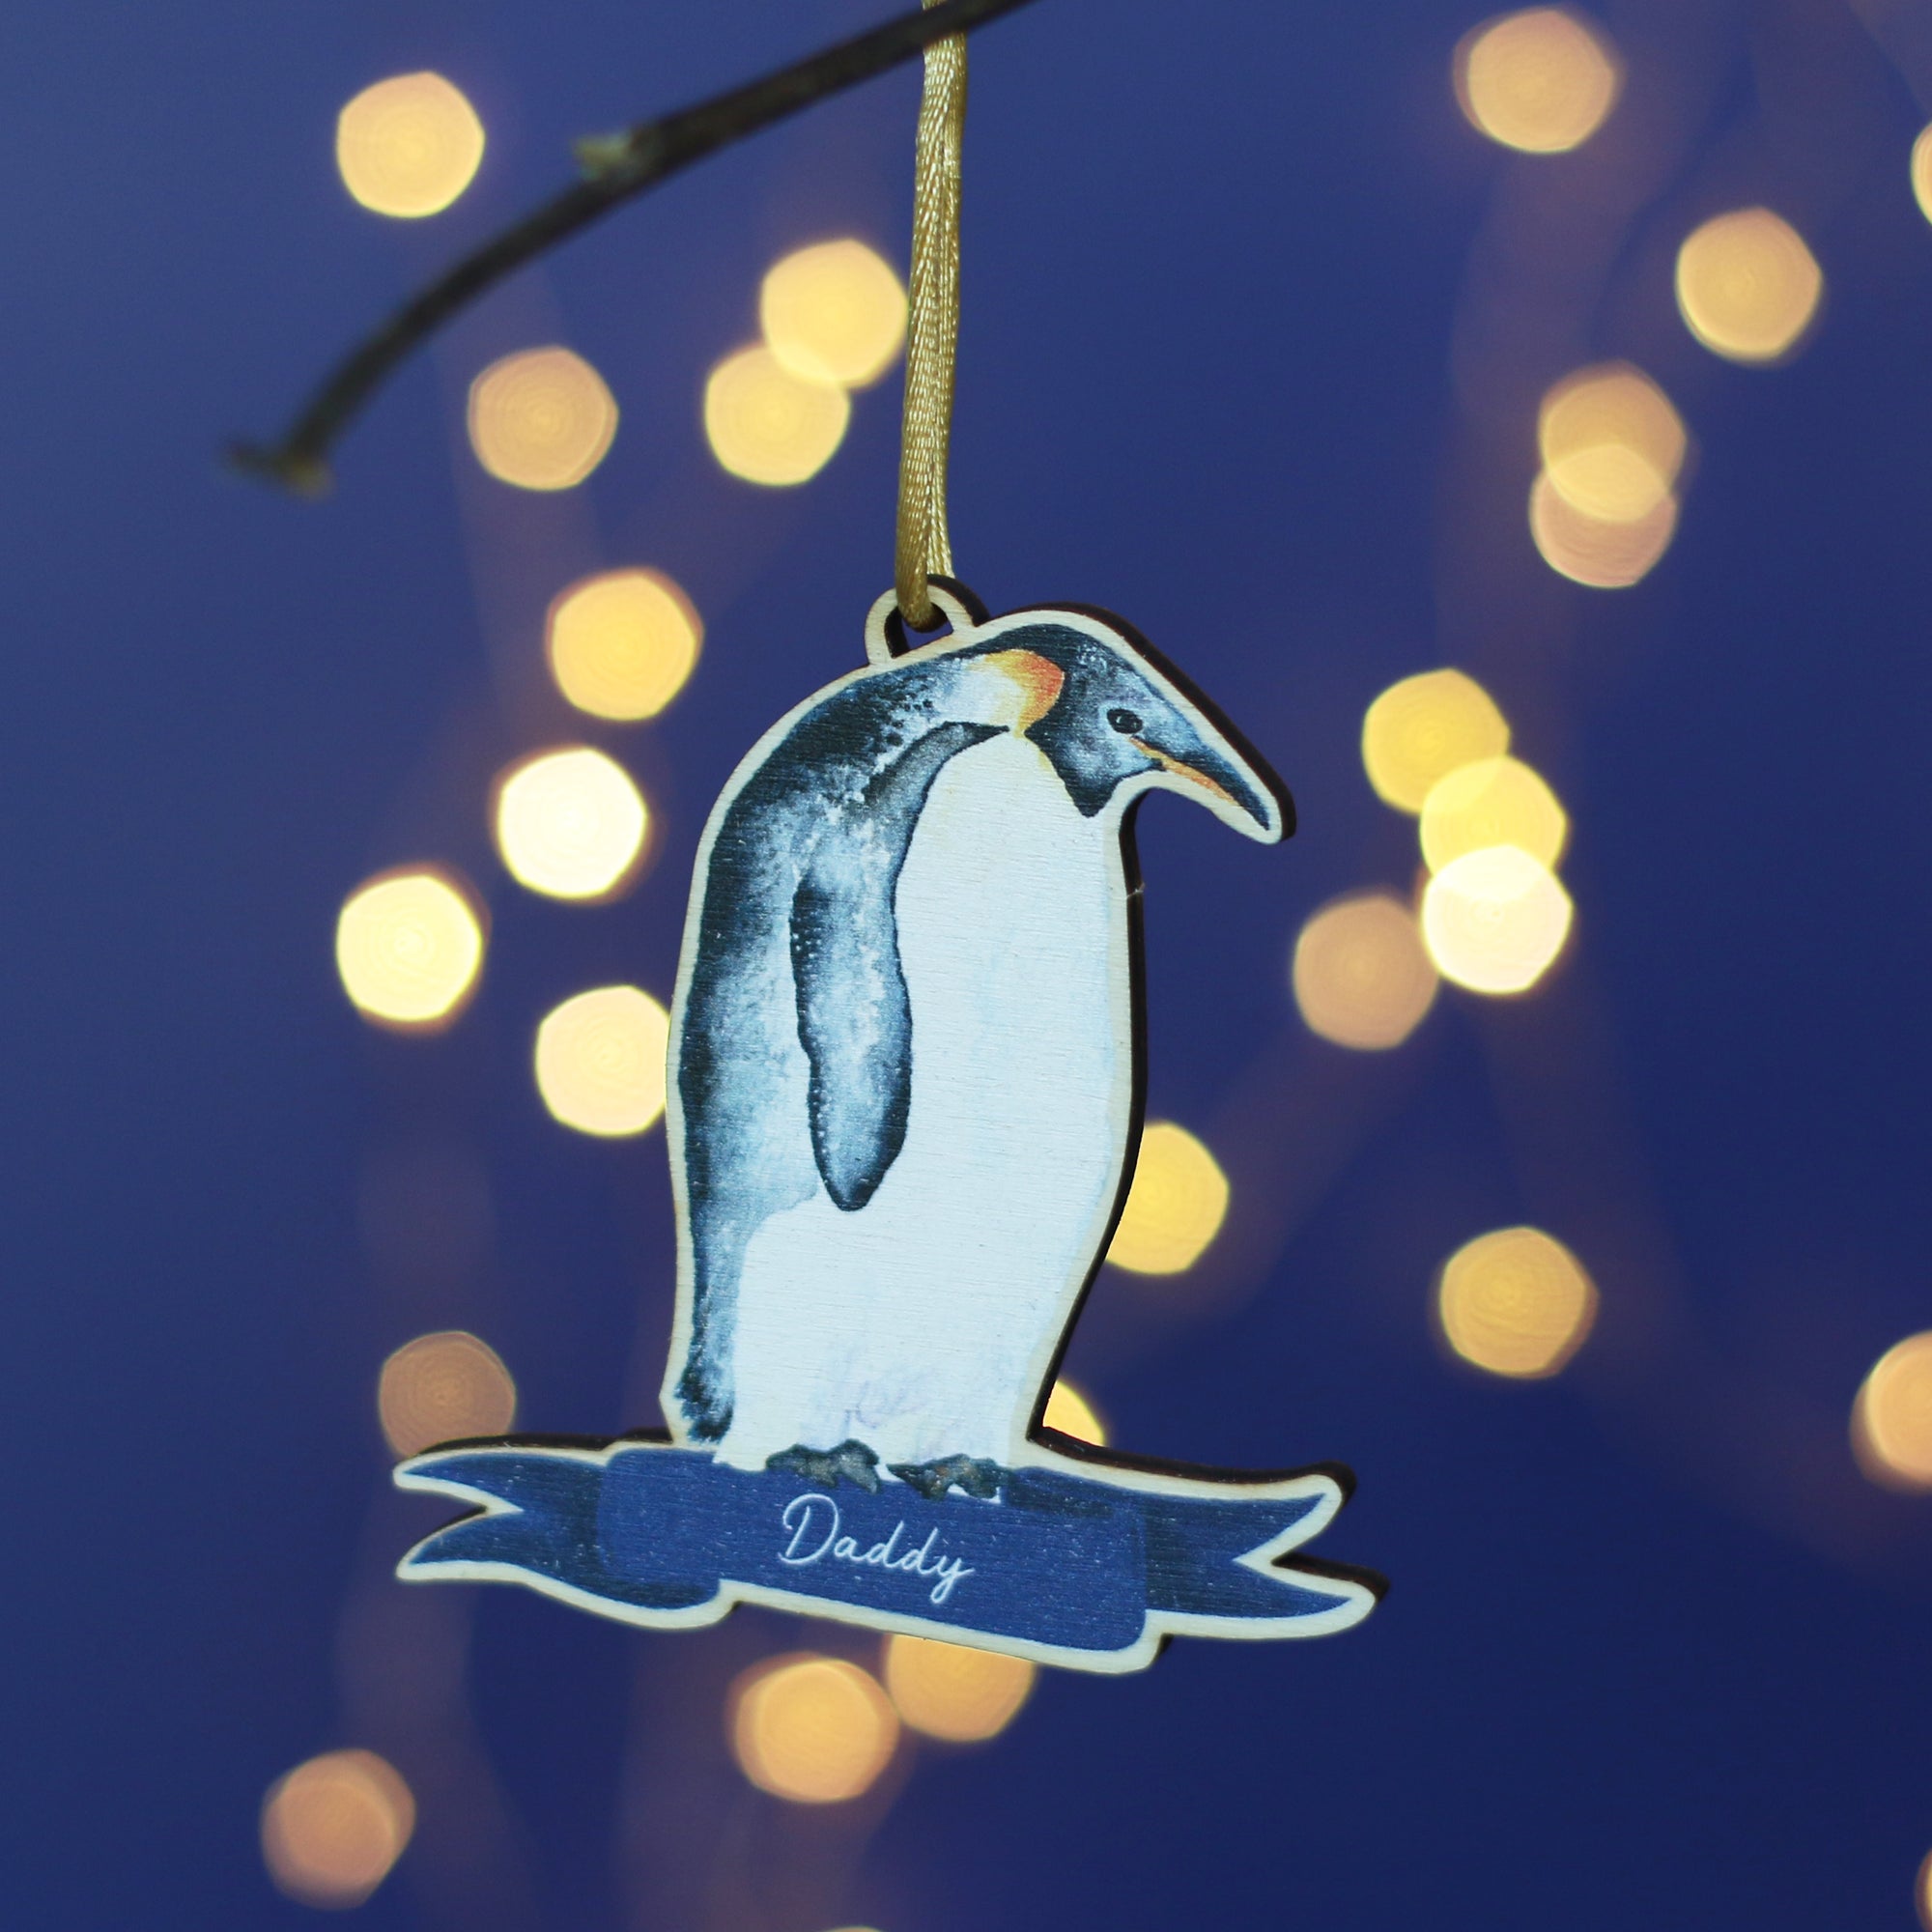 A wooden penguin decoration hangs from a branch. It is a watercolour of an Emperor penguin and has the name Daddy at the bottom. In the background there's a blue wall and twinkly Christmas lights